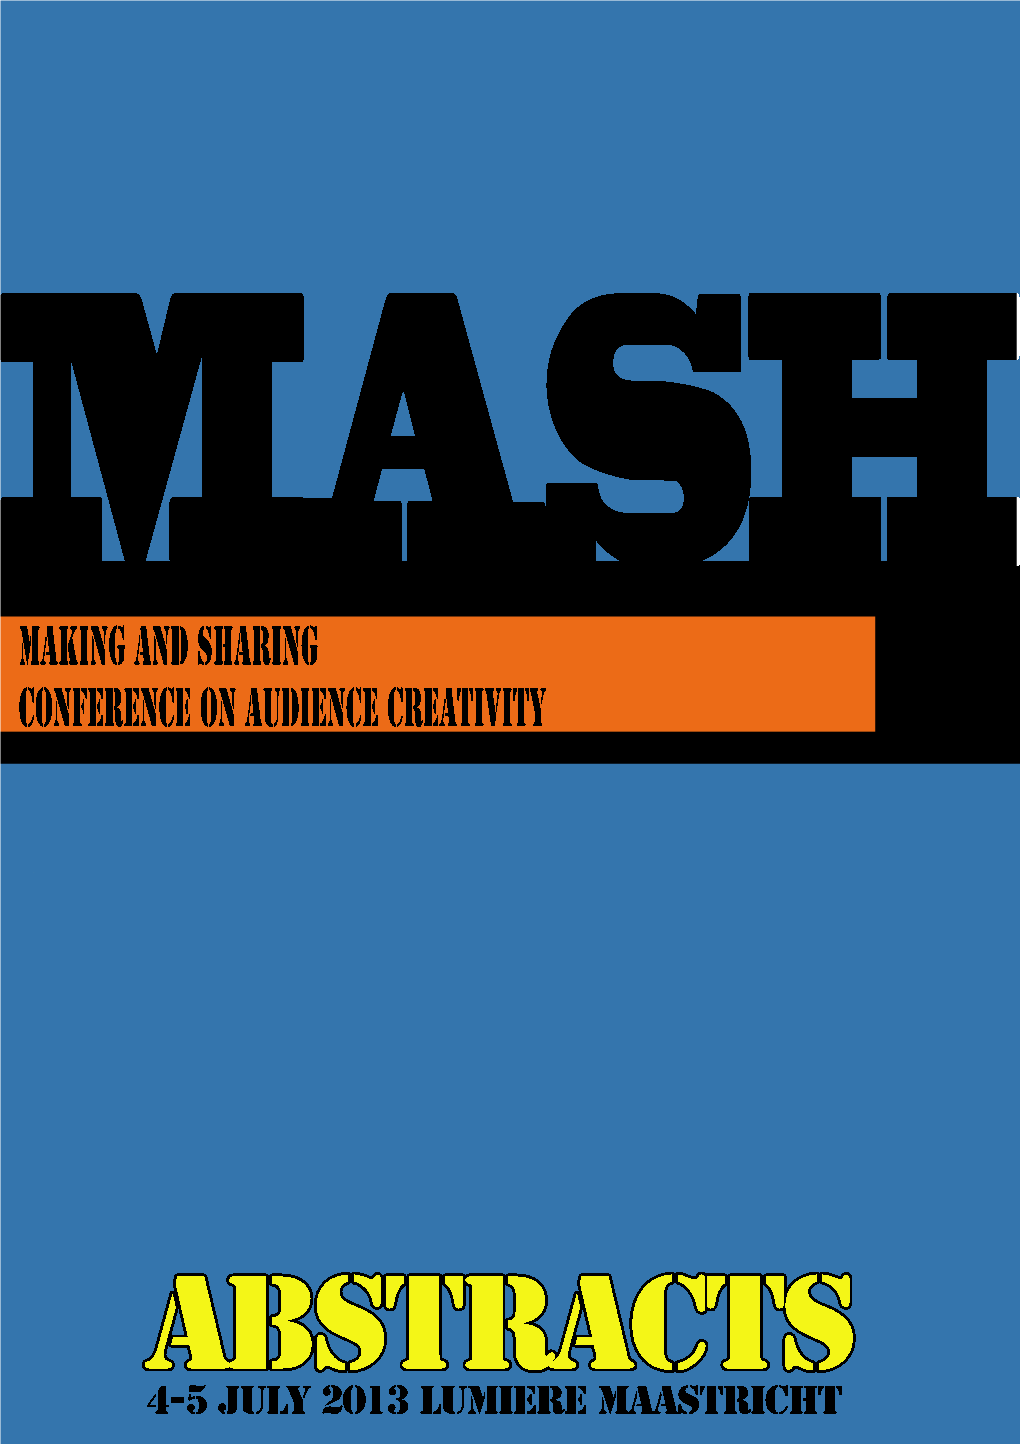 Mash2013-Abstracts-Complete-V1.Pdf